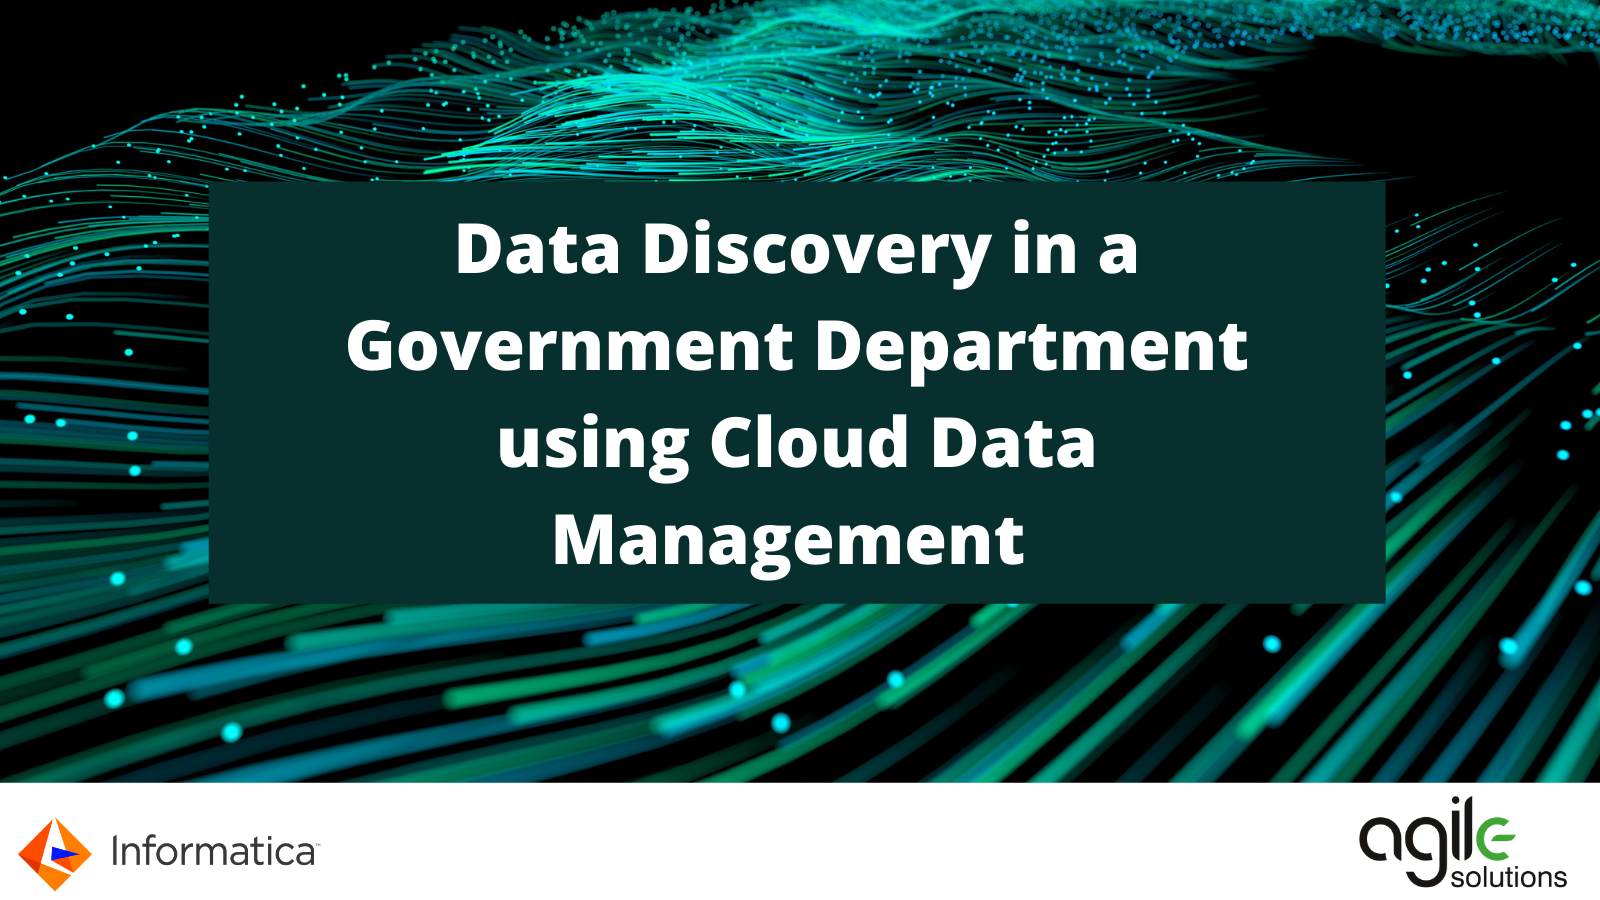 Data Discovery in a Government Department using Cloud Data Management